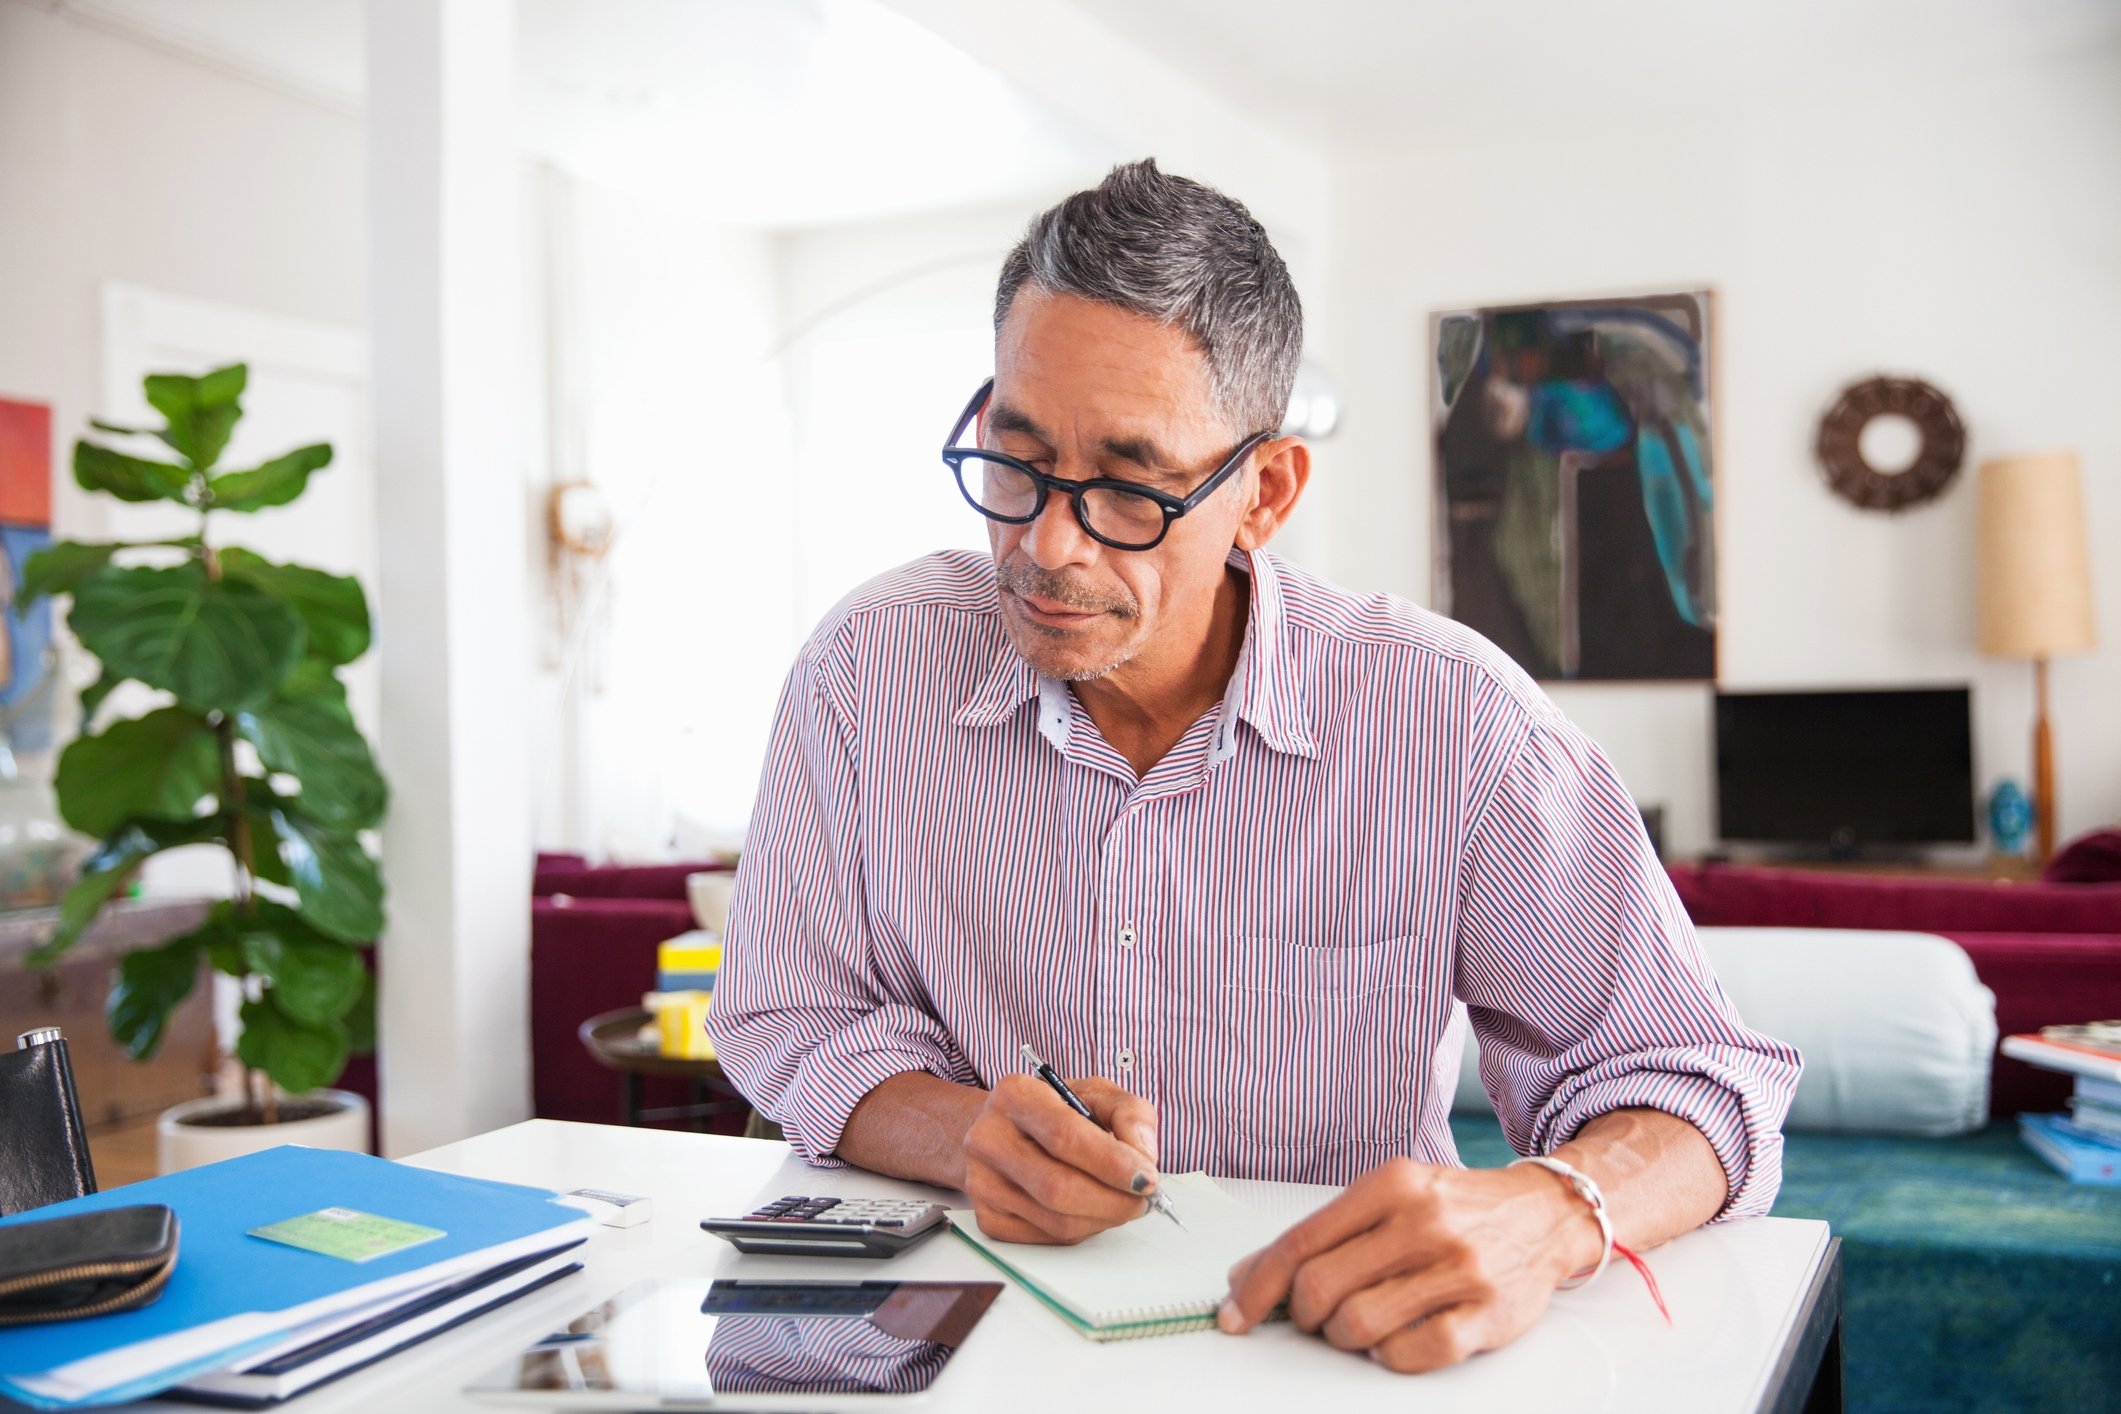 A British study found that around 20% of adults over 55 feel discriminated against due to their age, citing limited career opportunities and increased job pressure. (Getty Images Photo)